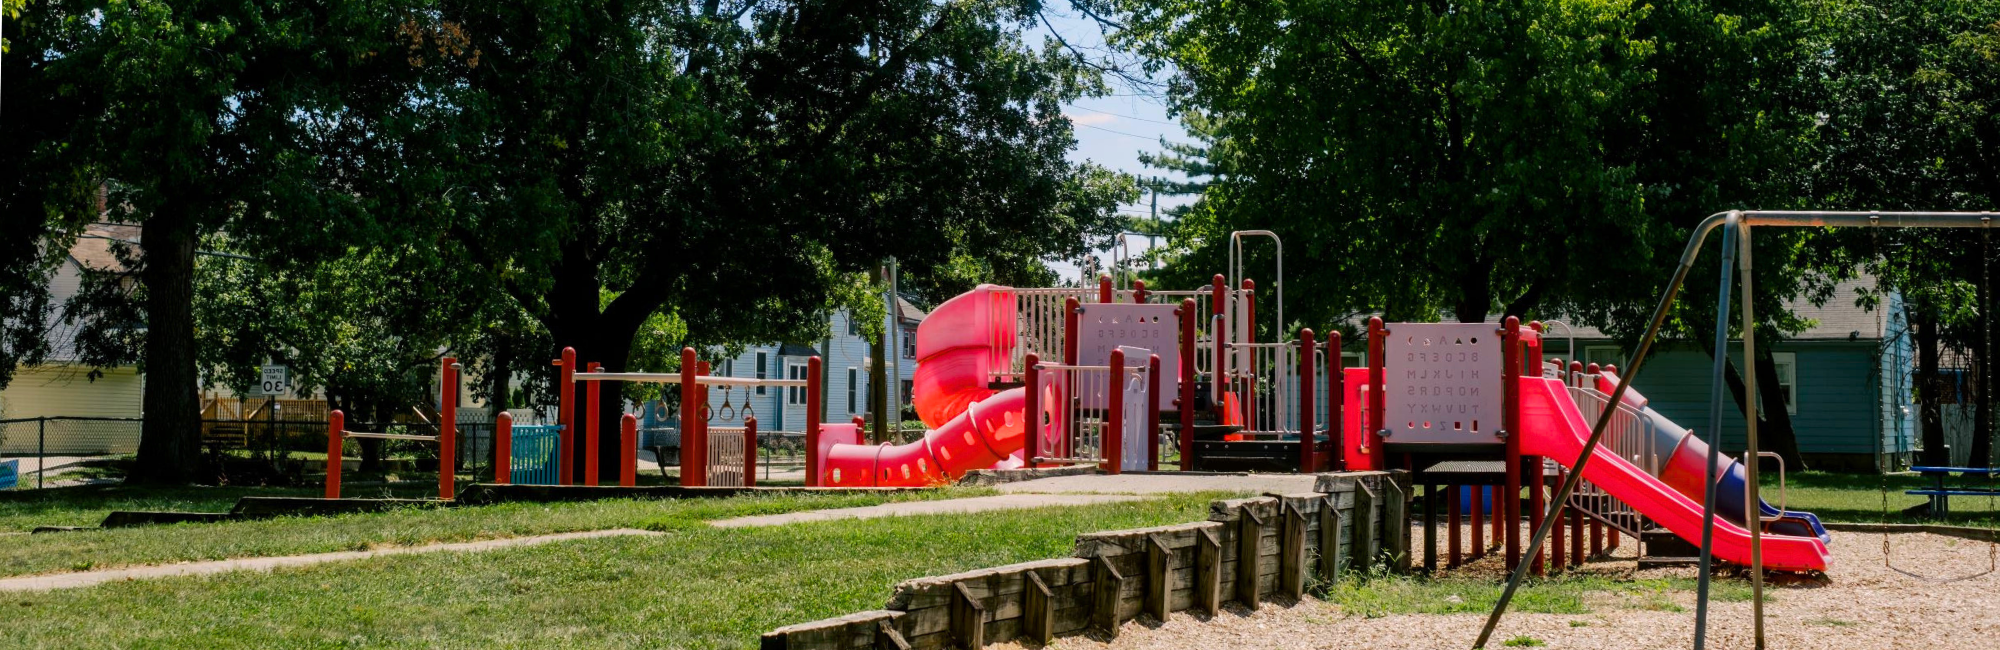 Park with a playground